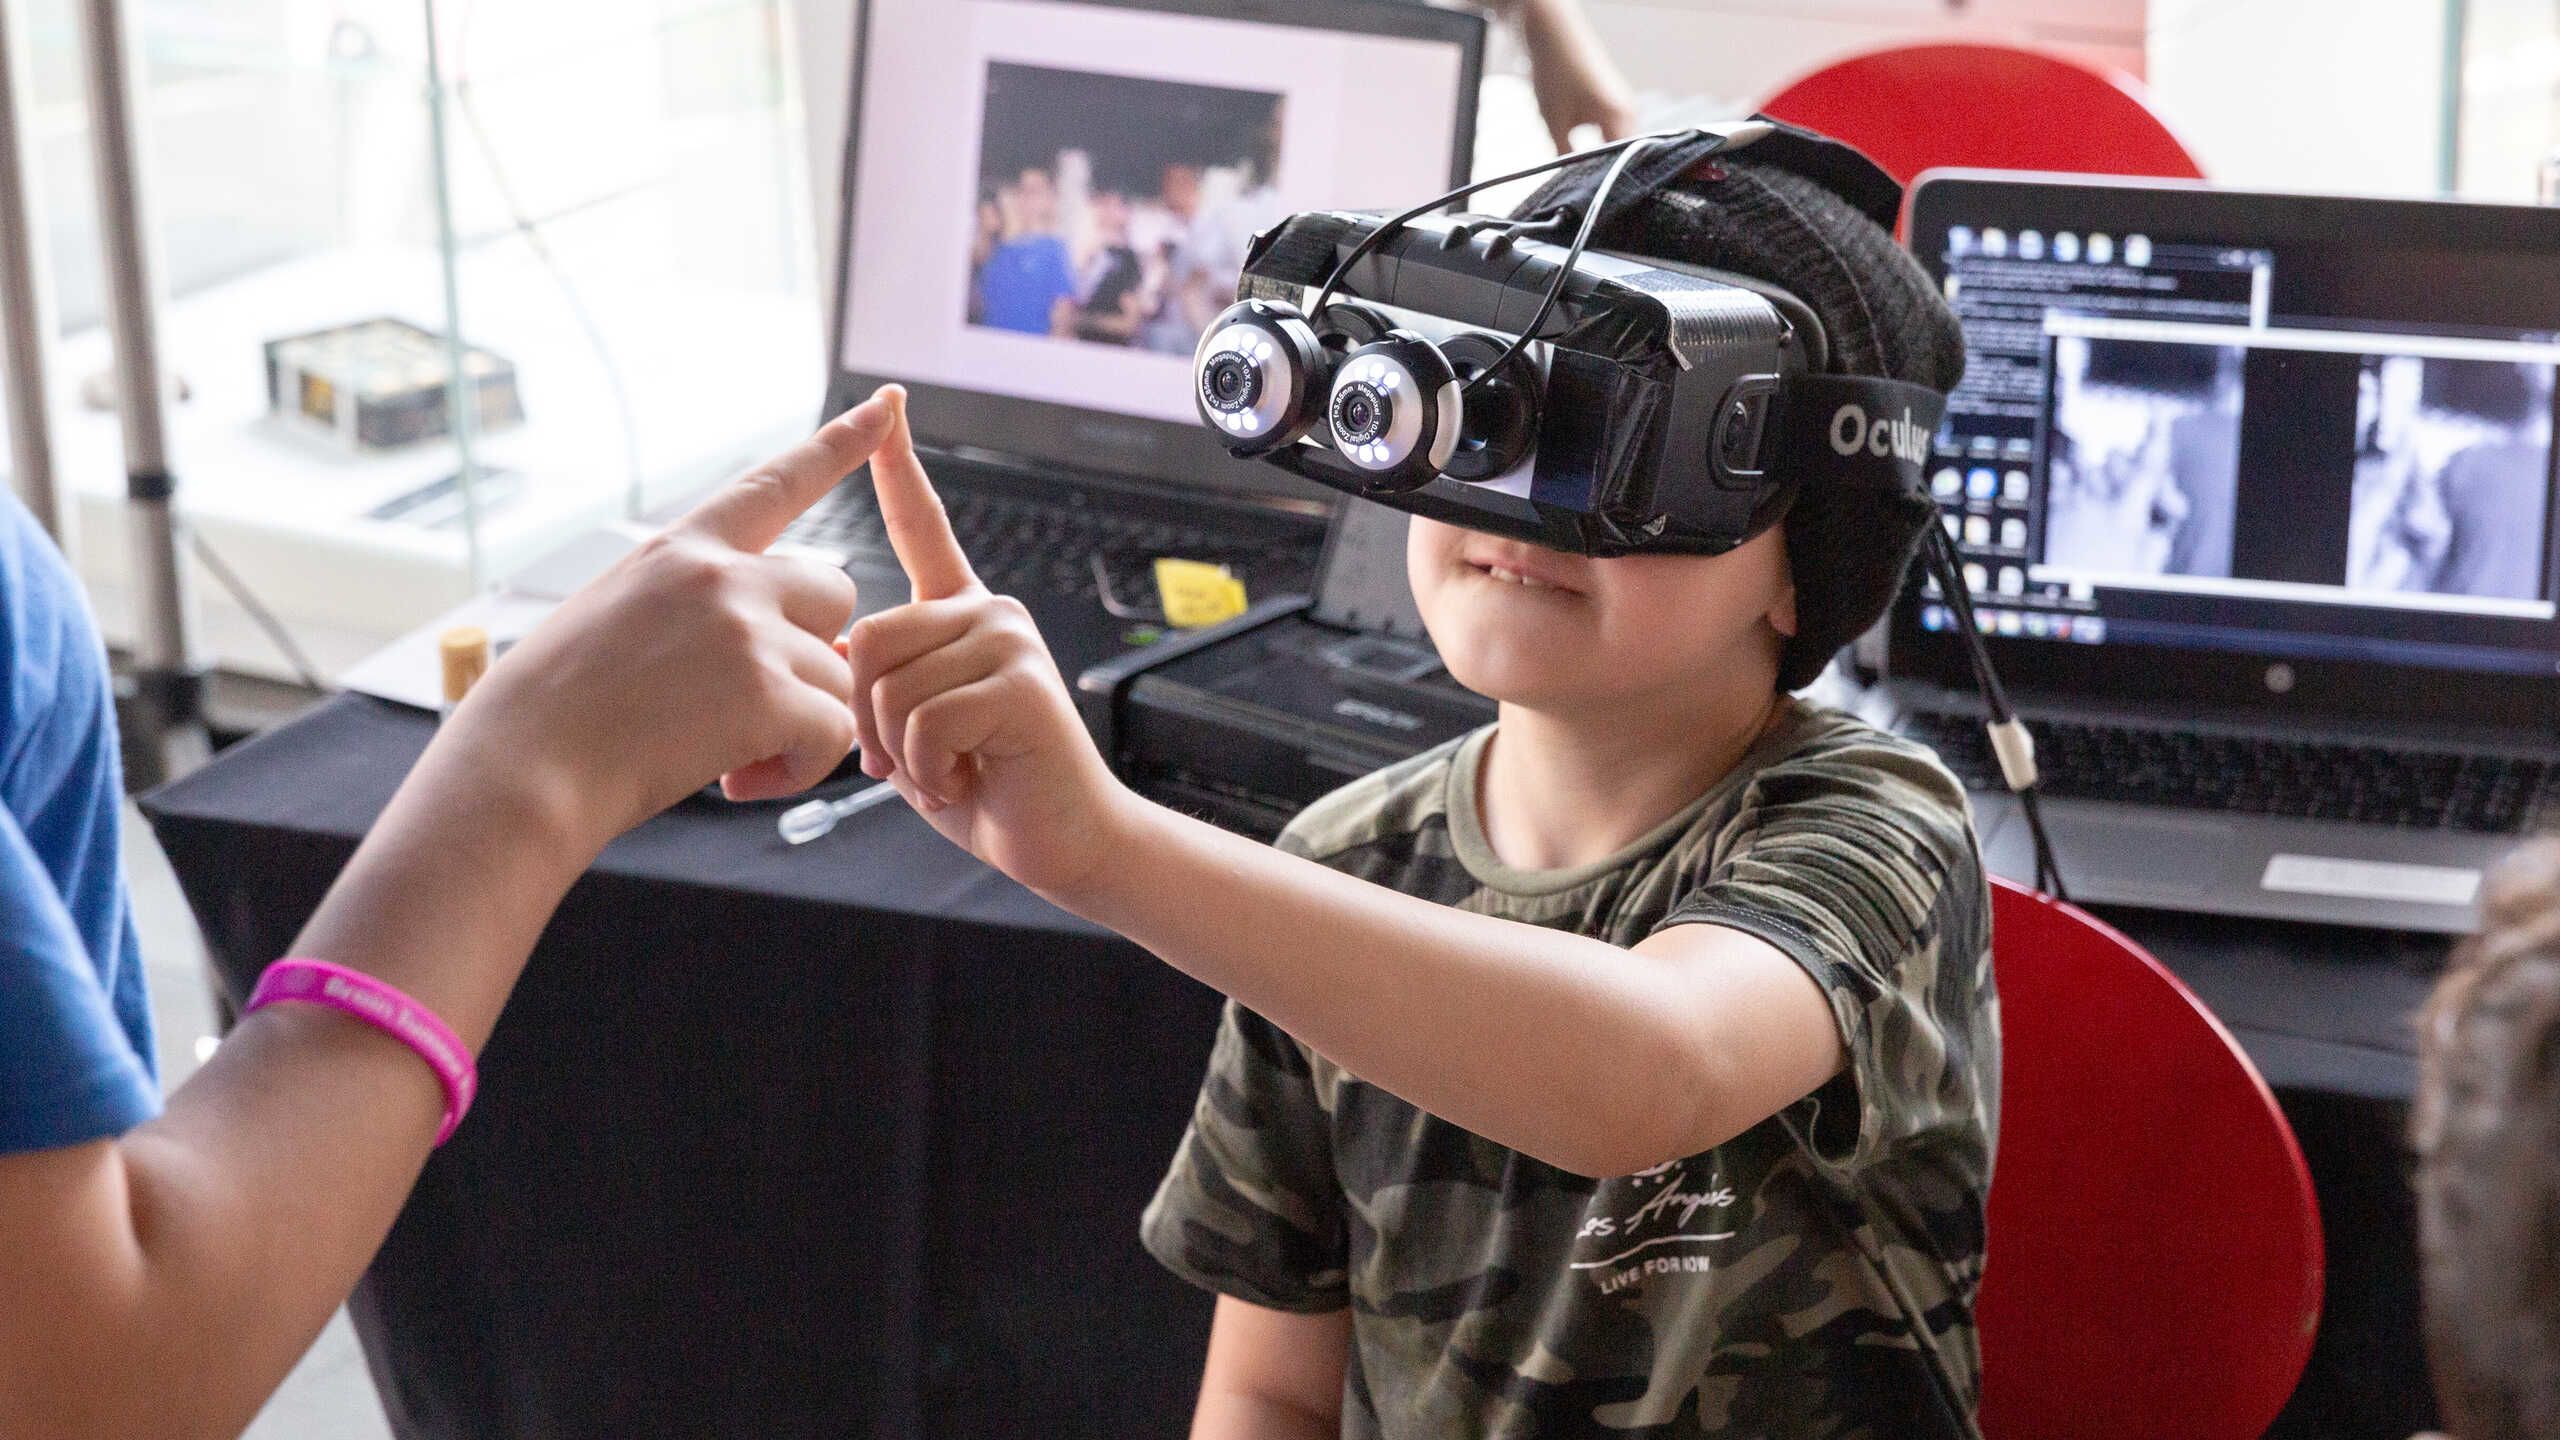 A young boy with VR goggles touching index fingers with a scientist